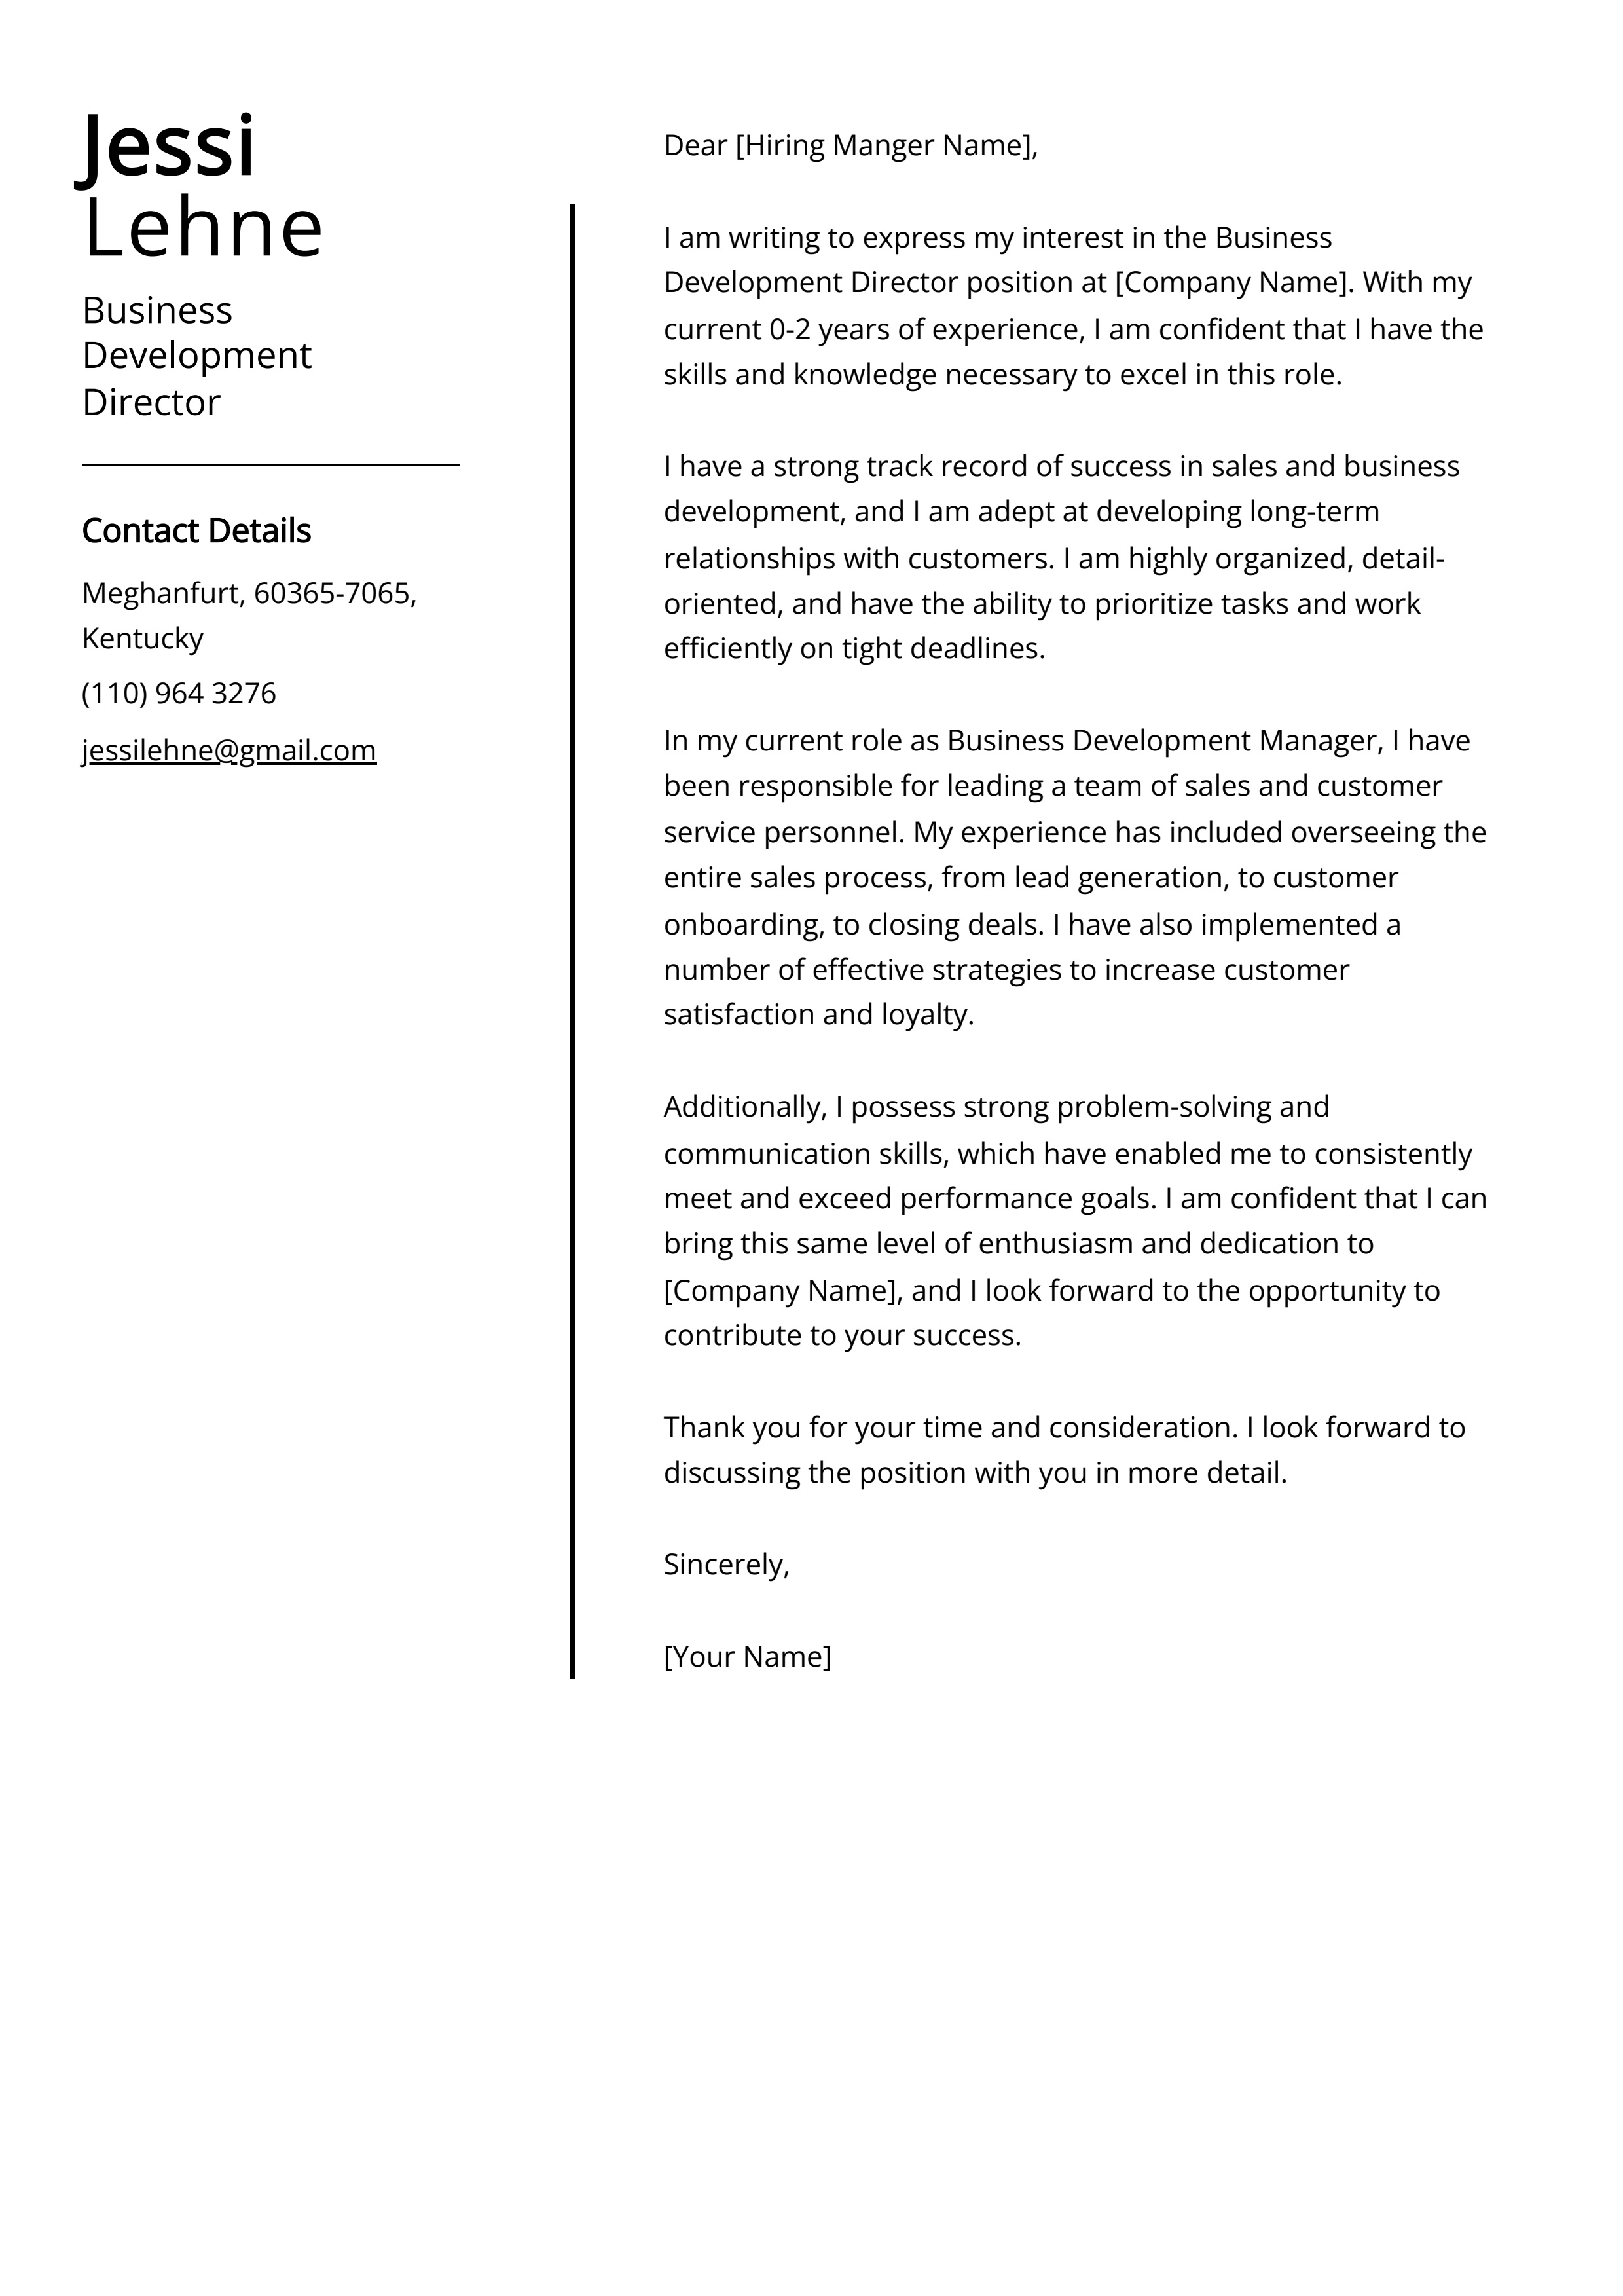 Business Development Director Cover Letter Example